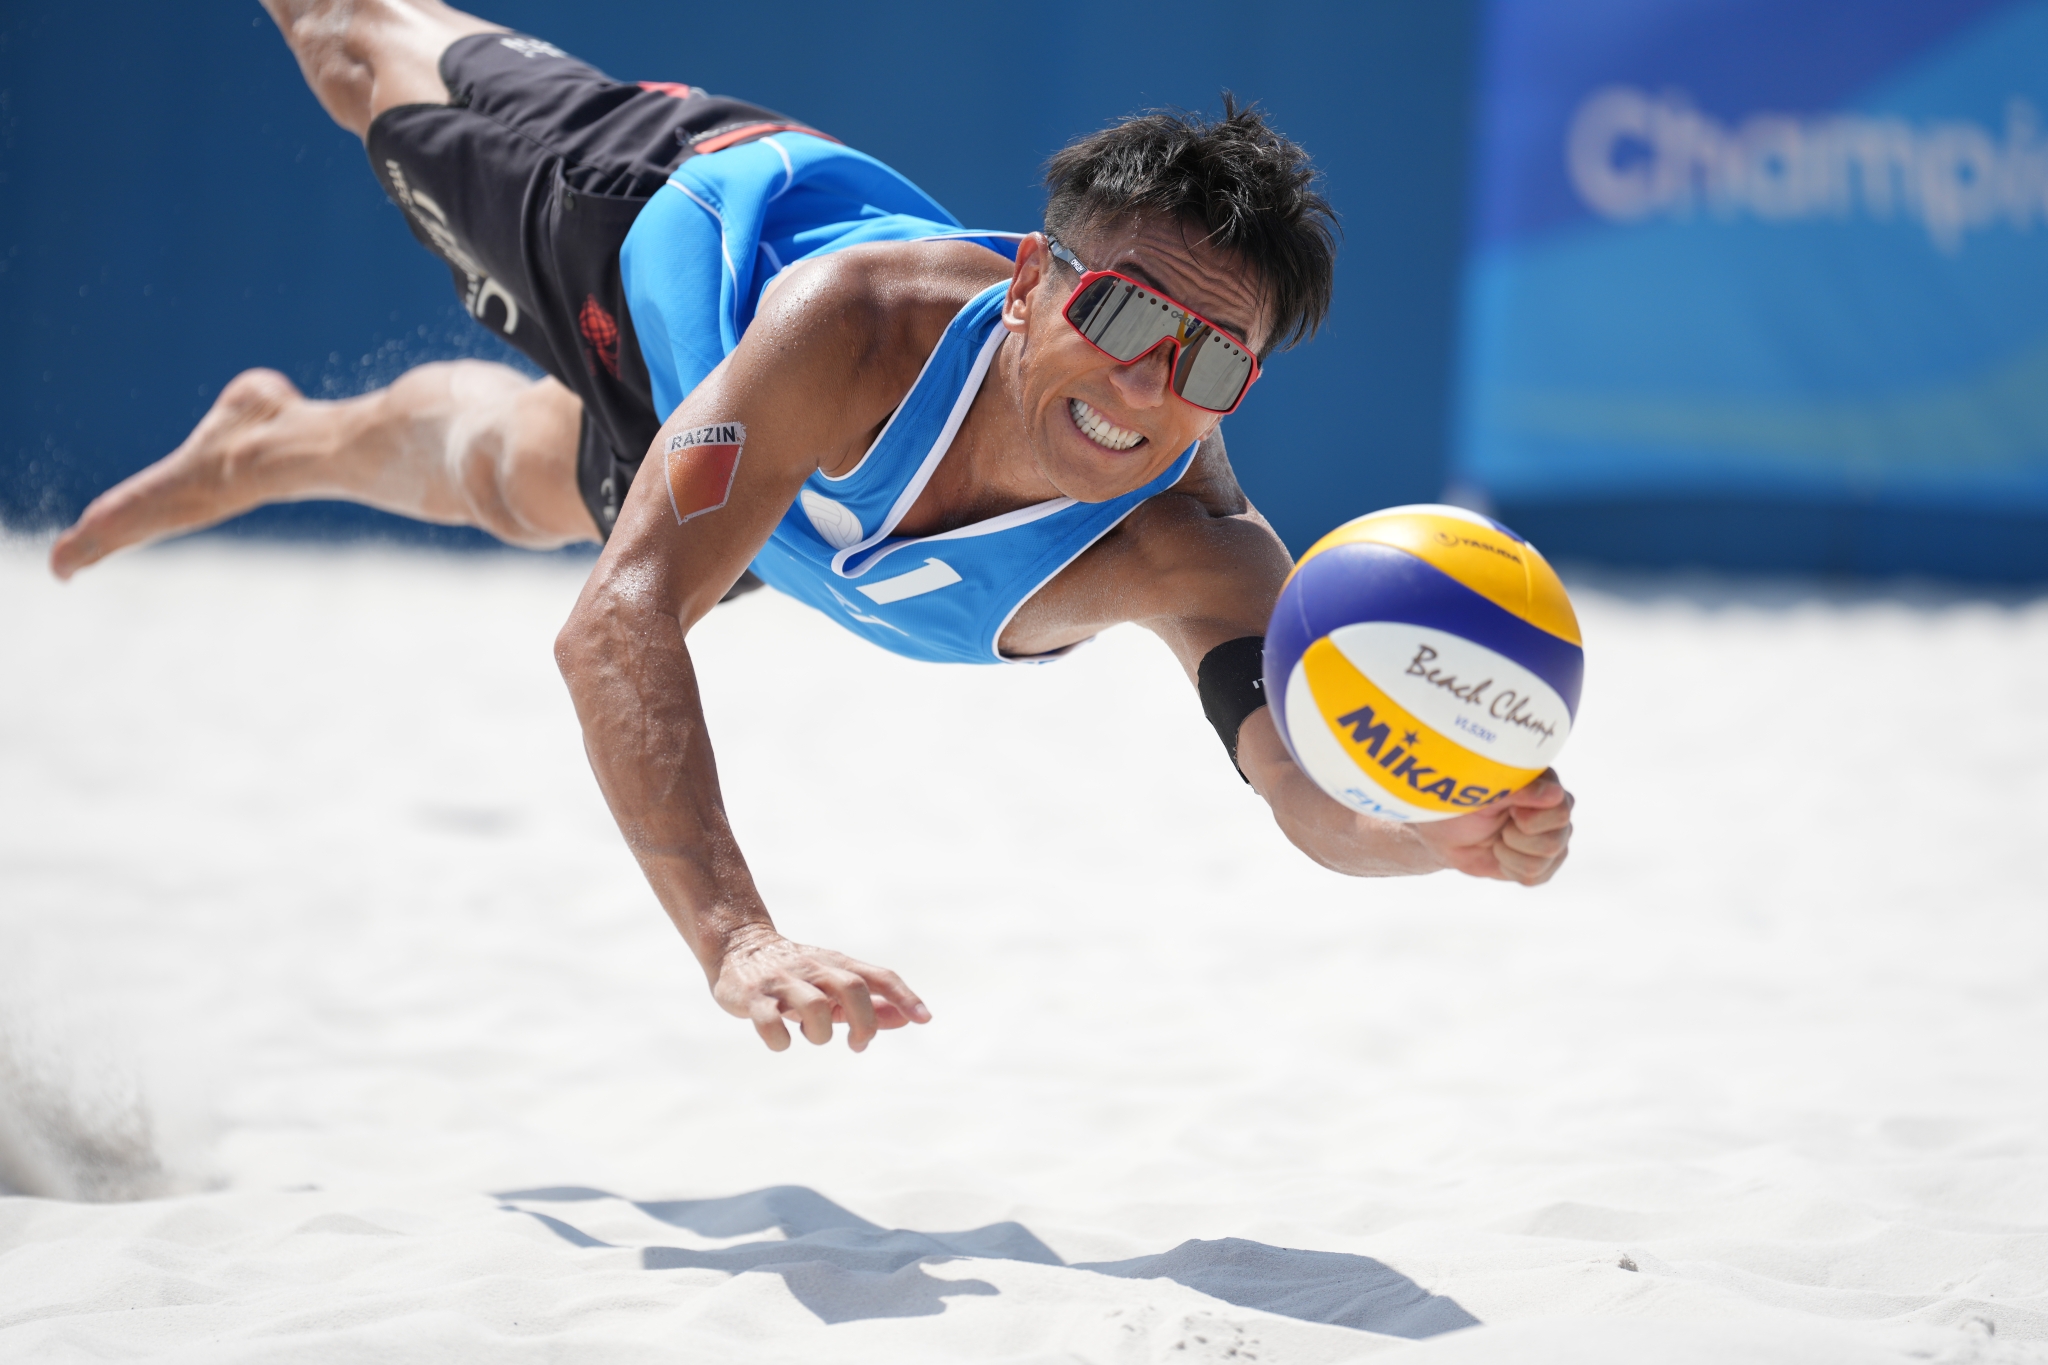 Male volleyball player diving for a ball